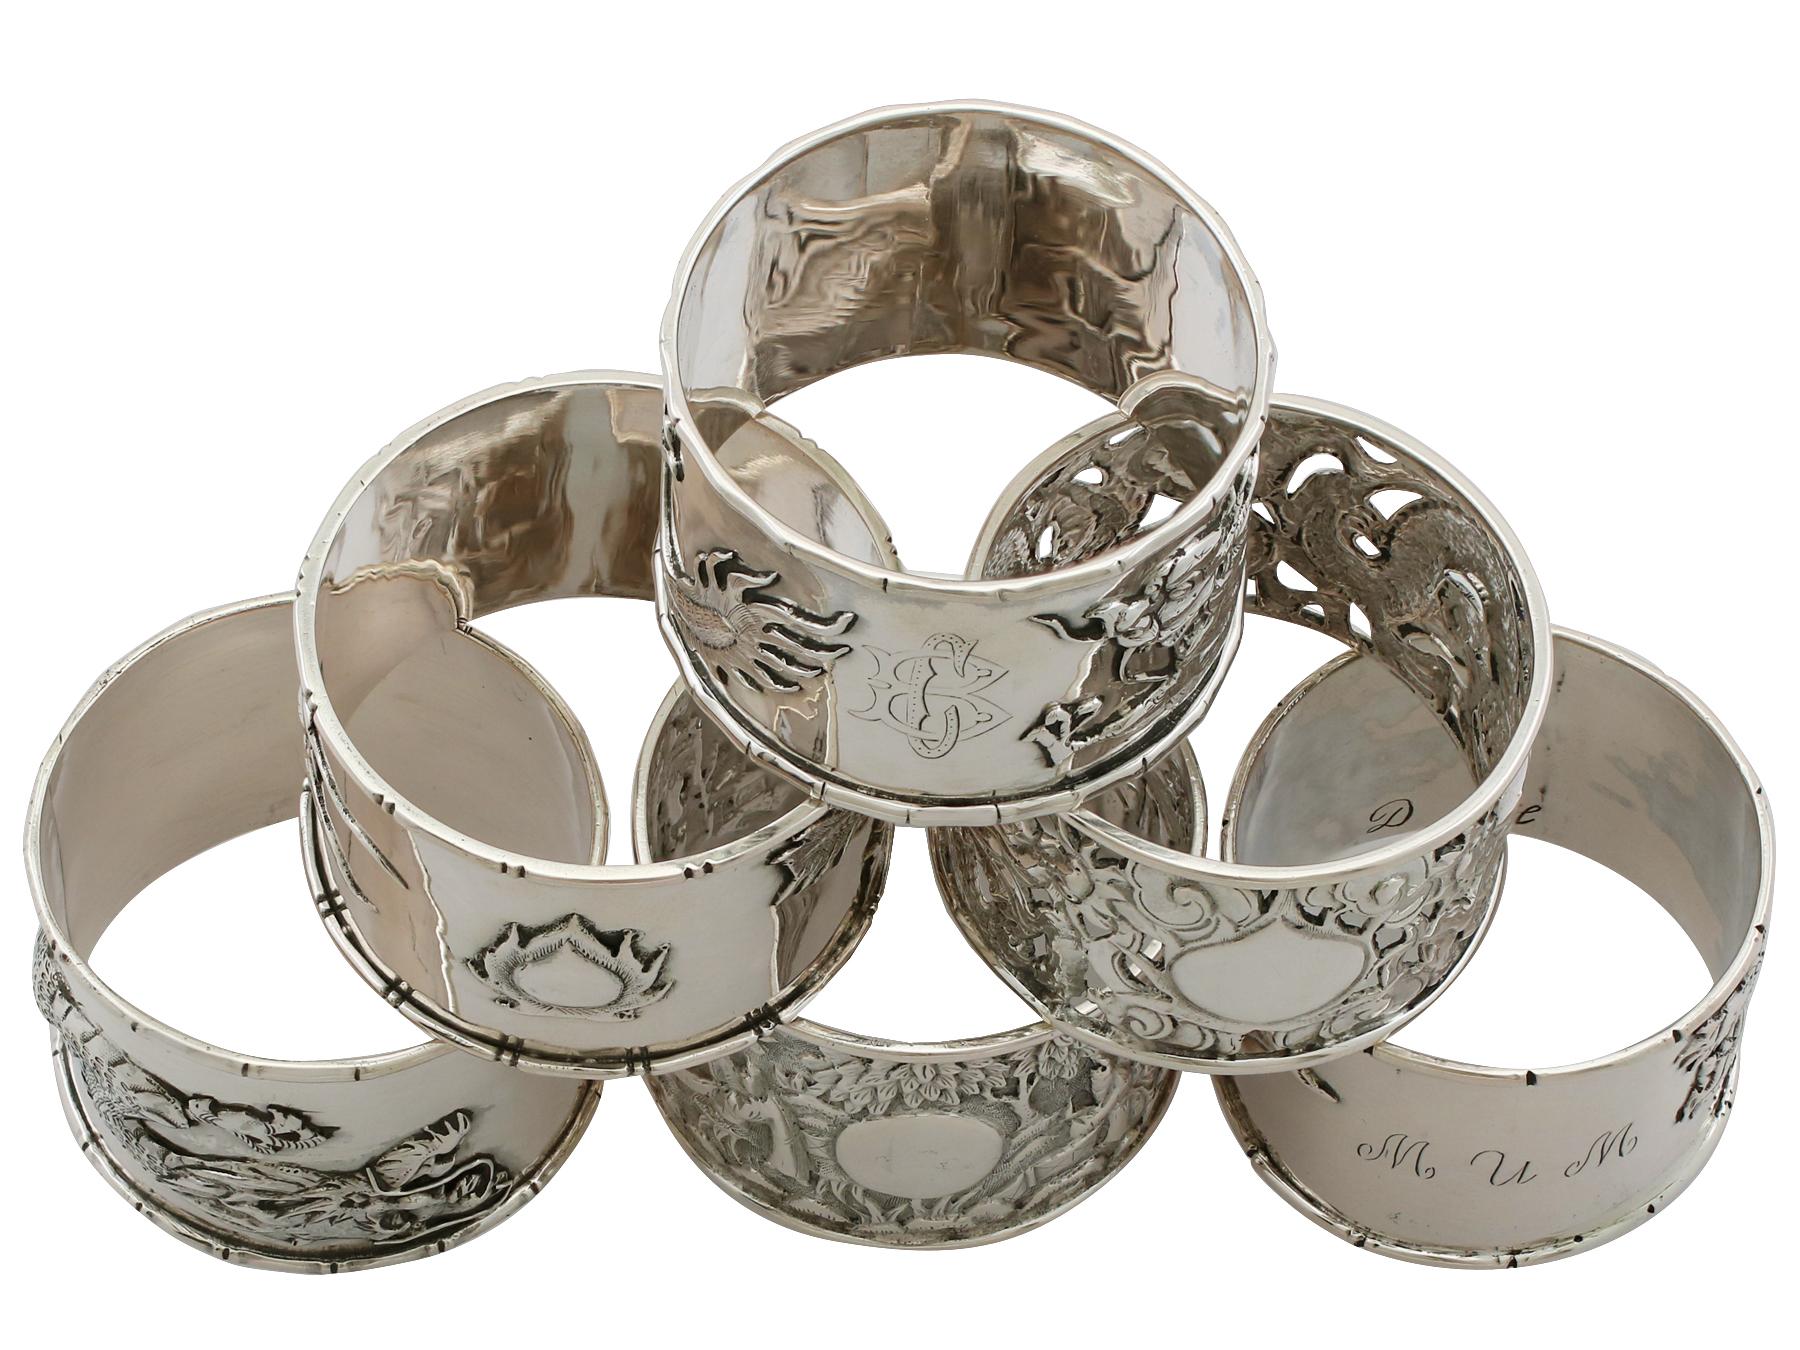 An exceptional, fine and impressive composite set of six antique Chinese export silver napkin rings; an addition to our dining silverware collection.

This exceptional set of antique Chinese export silver napkin rings consists of six napkin rings,